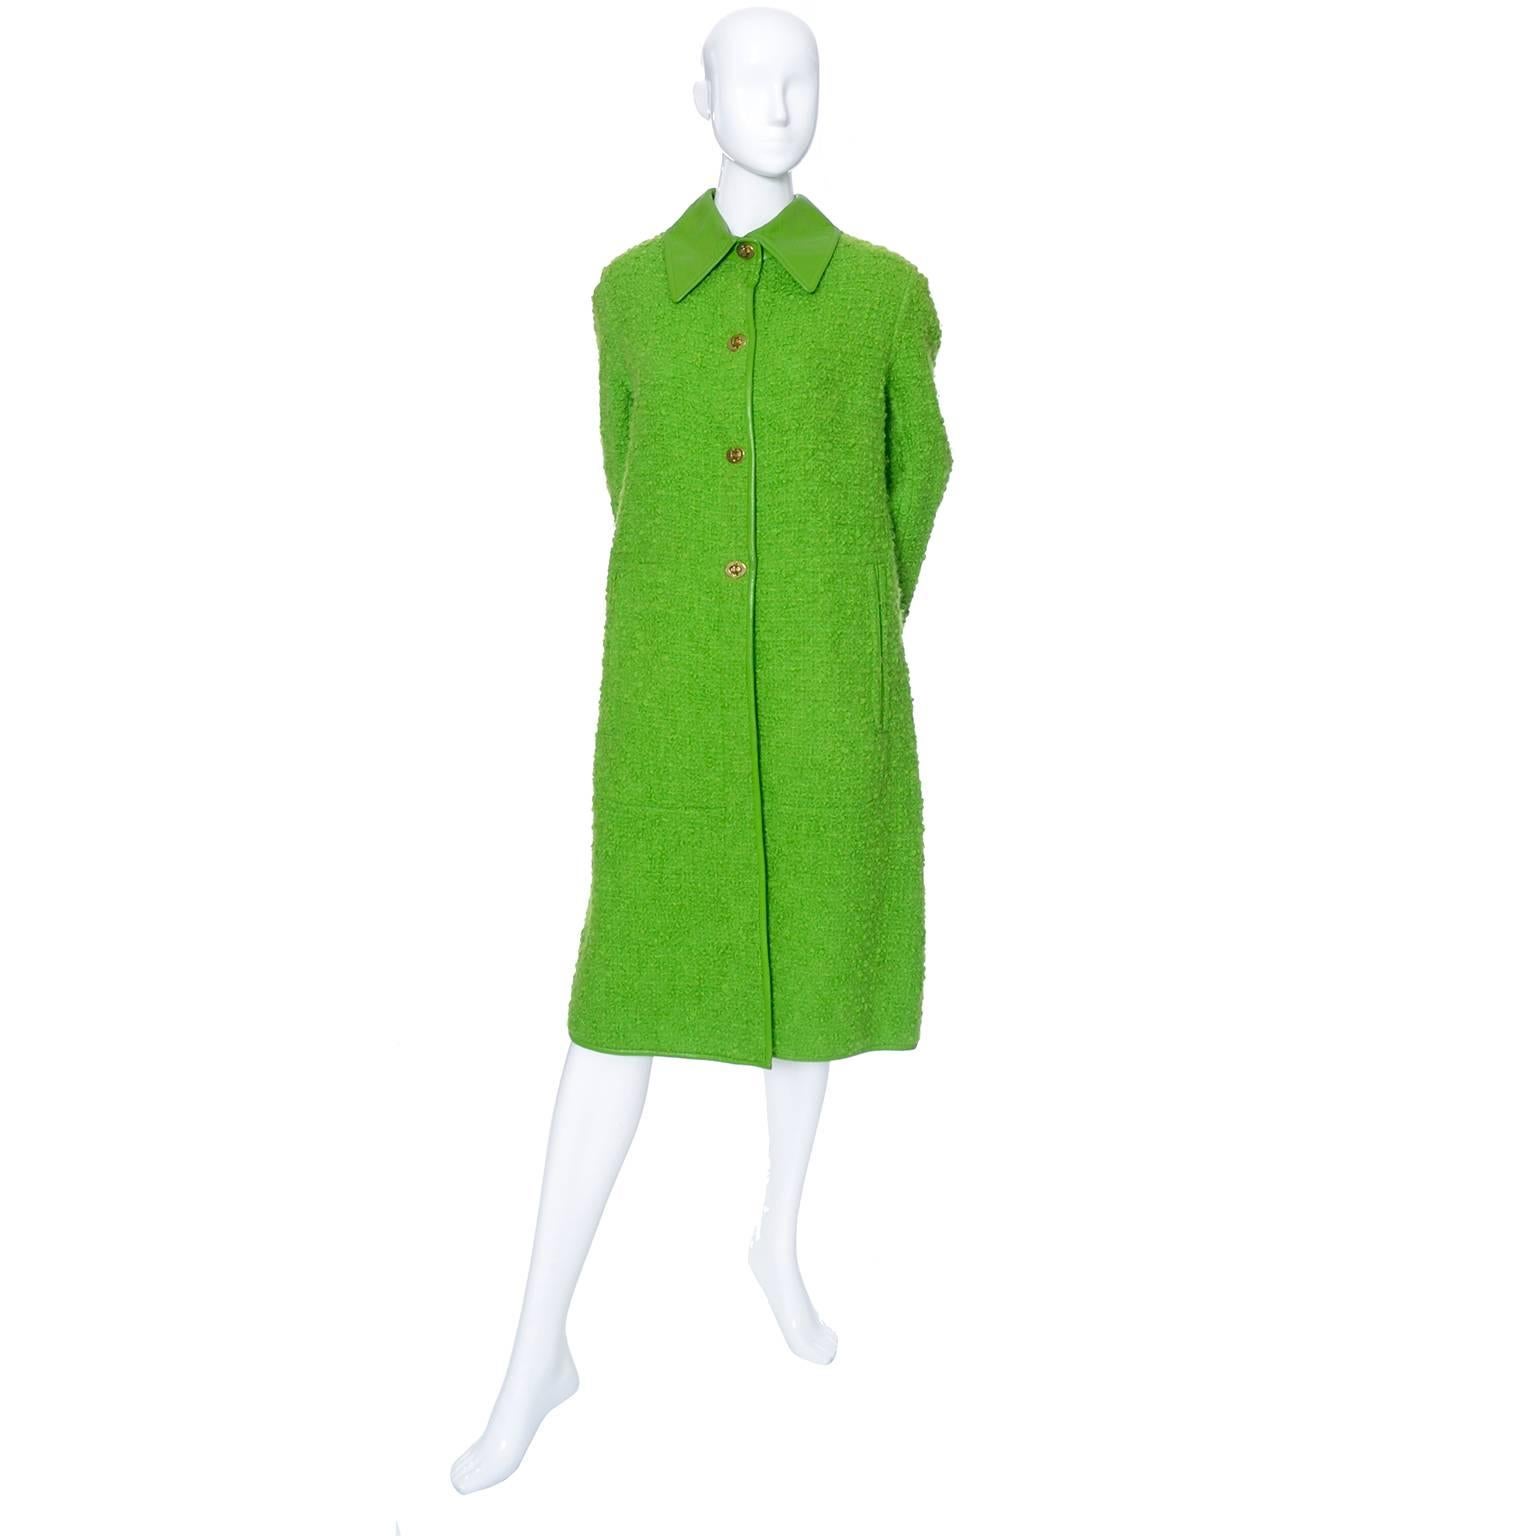 I love this late 1960's or early 1970's vintage Bonnie Cashin curly lime green boucle' Sills Coat. This fabulous coat has Cashin's signature toggle closures, a back slit, and side slit pockets. The coat has green leather trim that matches the